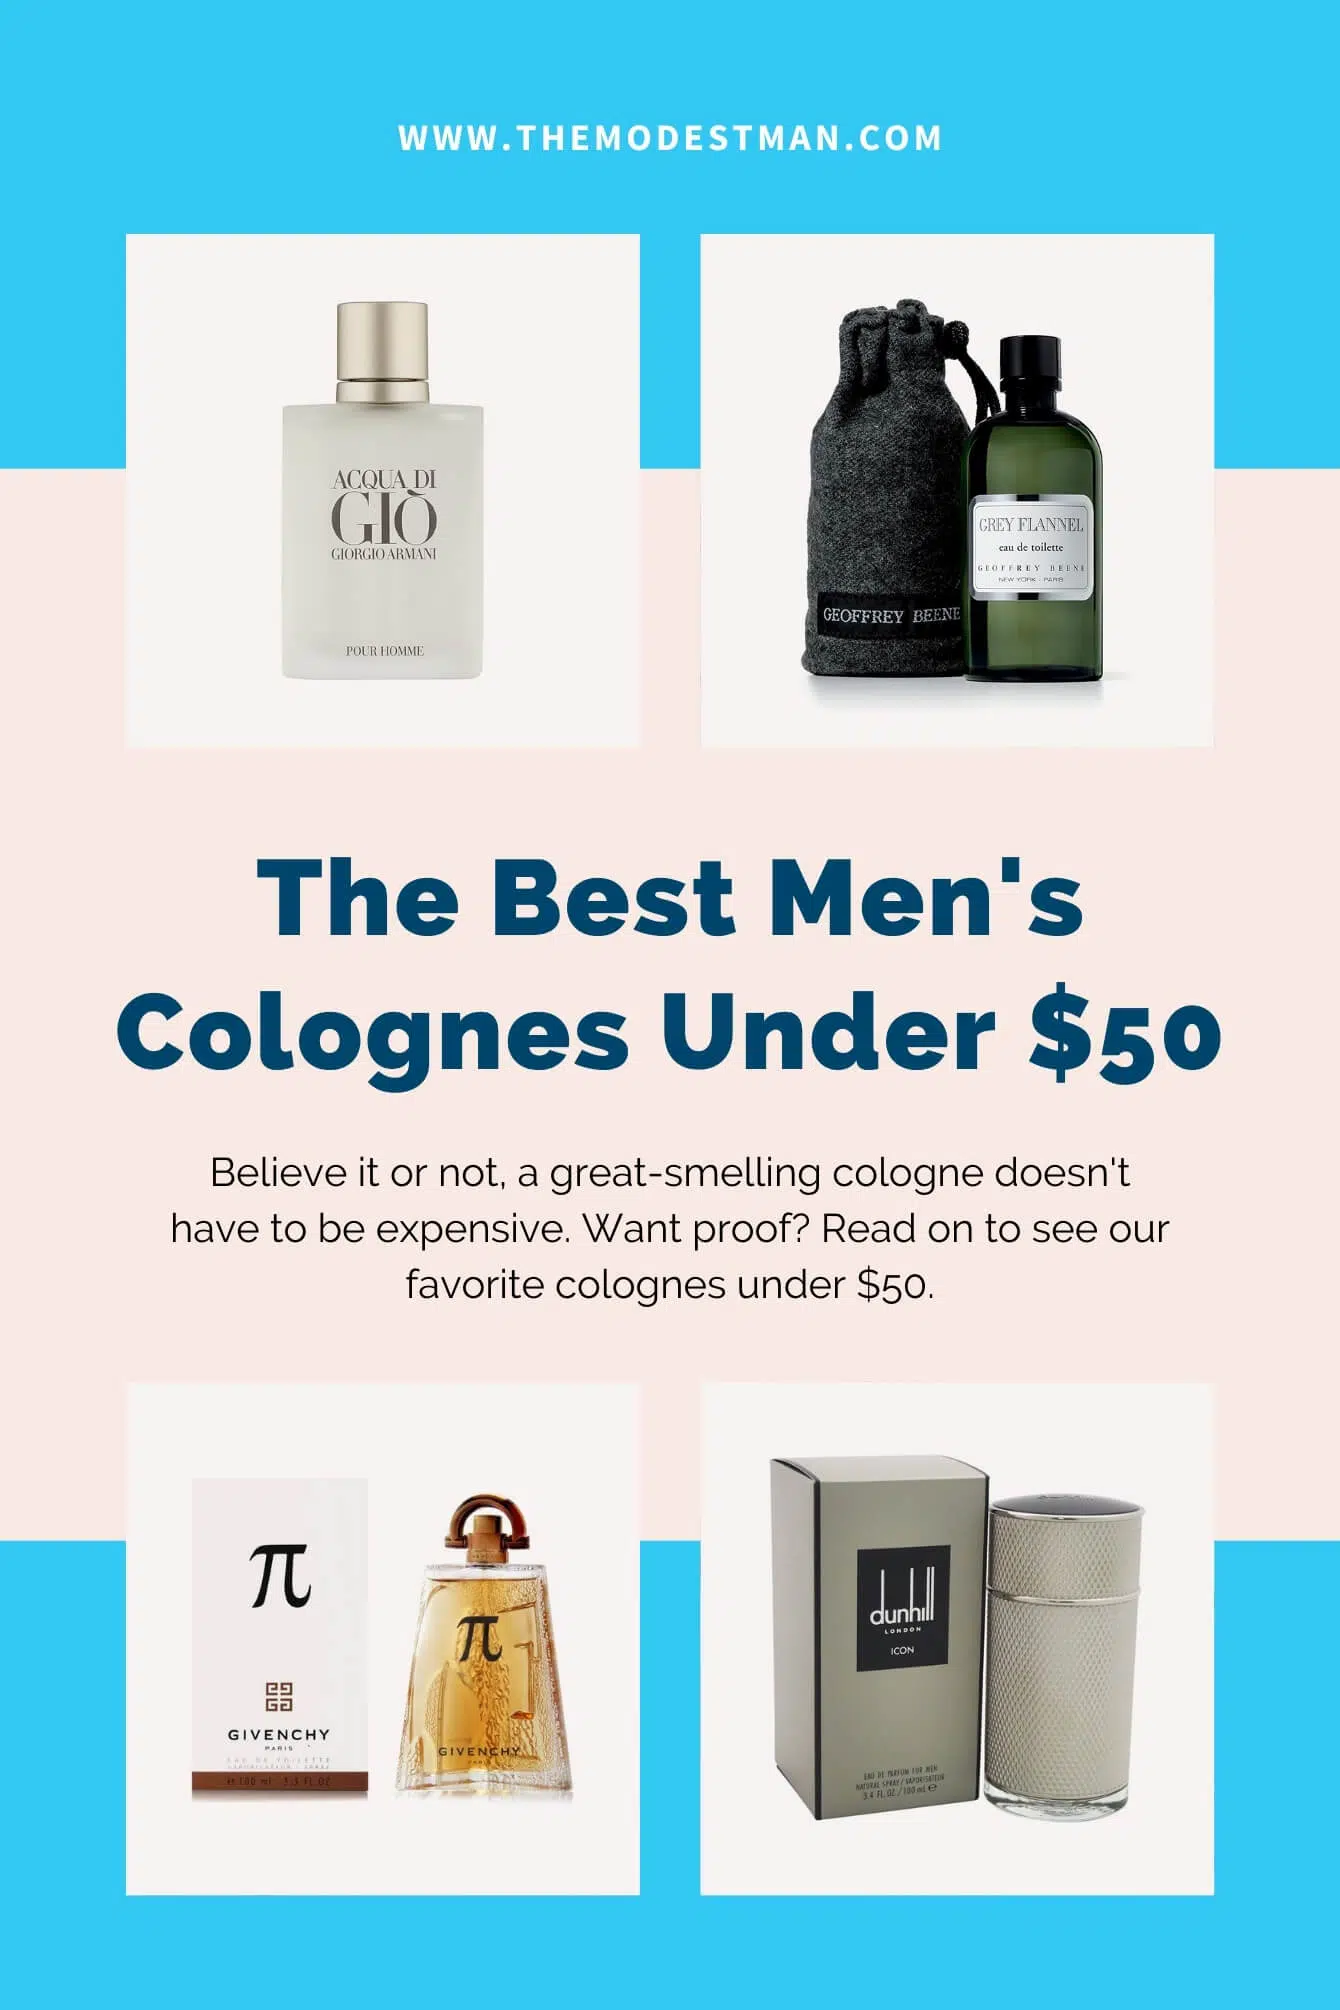 The 8 Best Men's Colognes Under $50: Cheap but Great! - The Modest Man